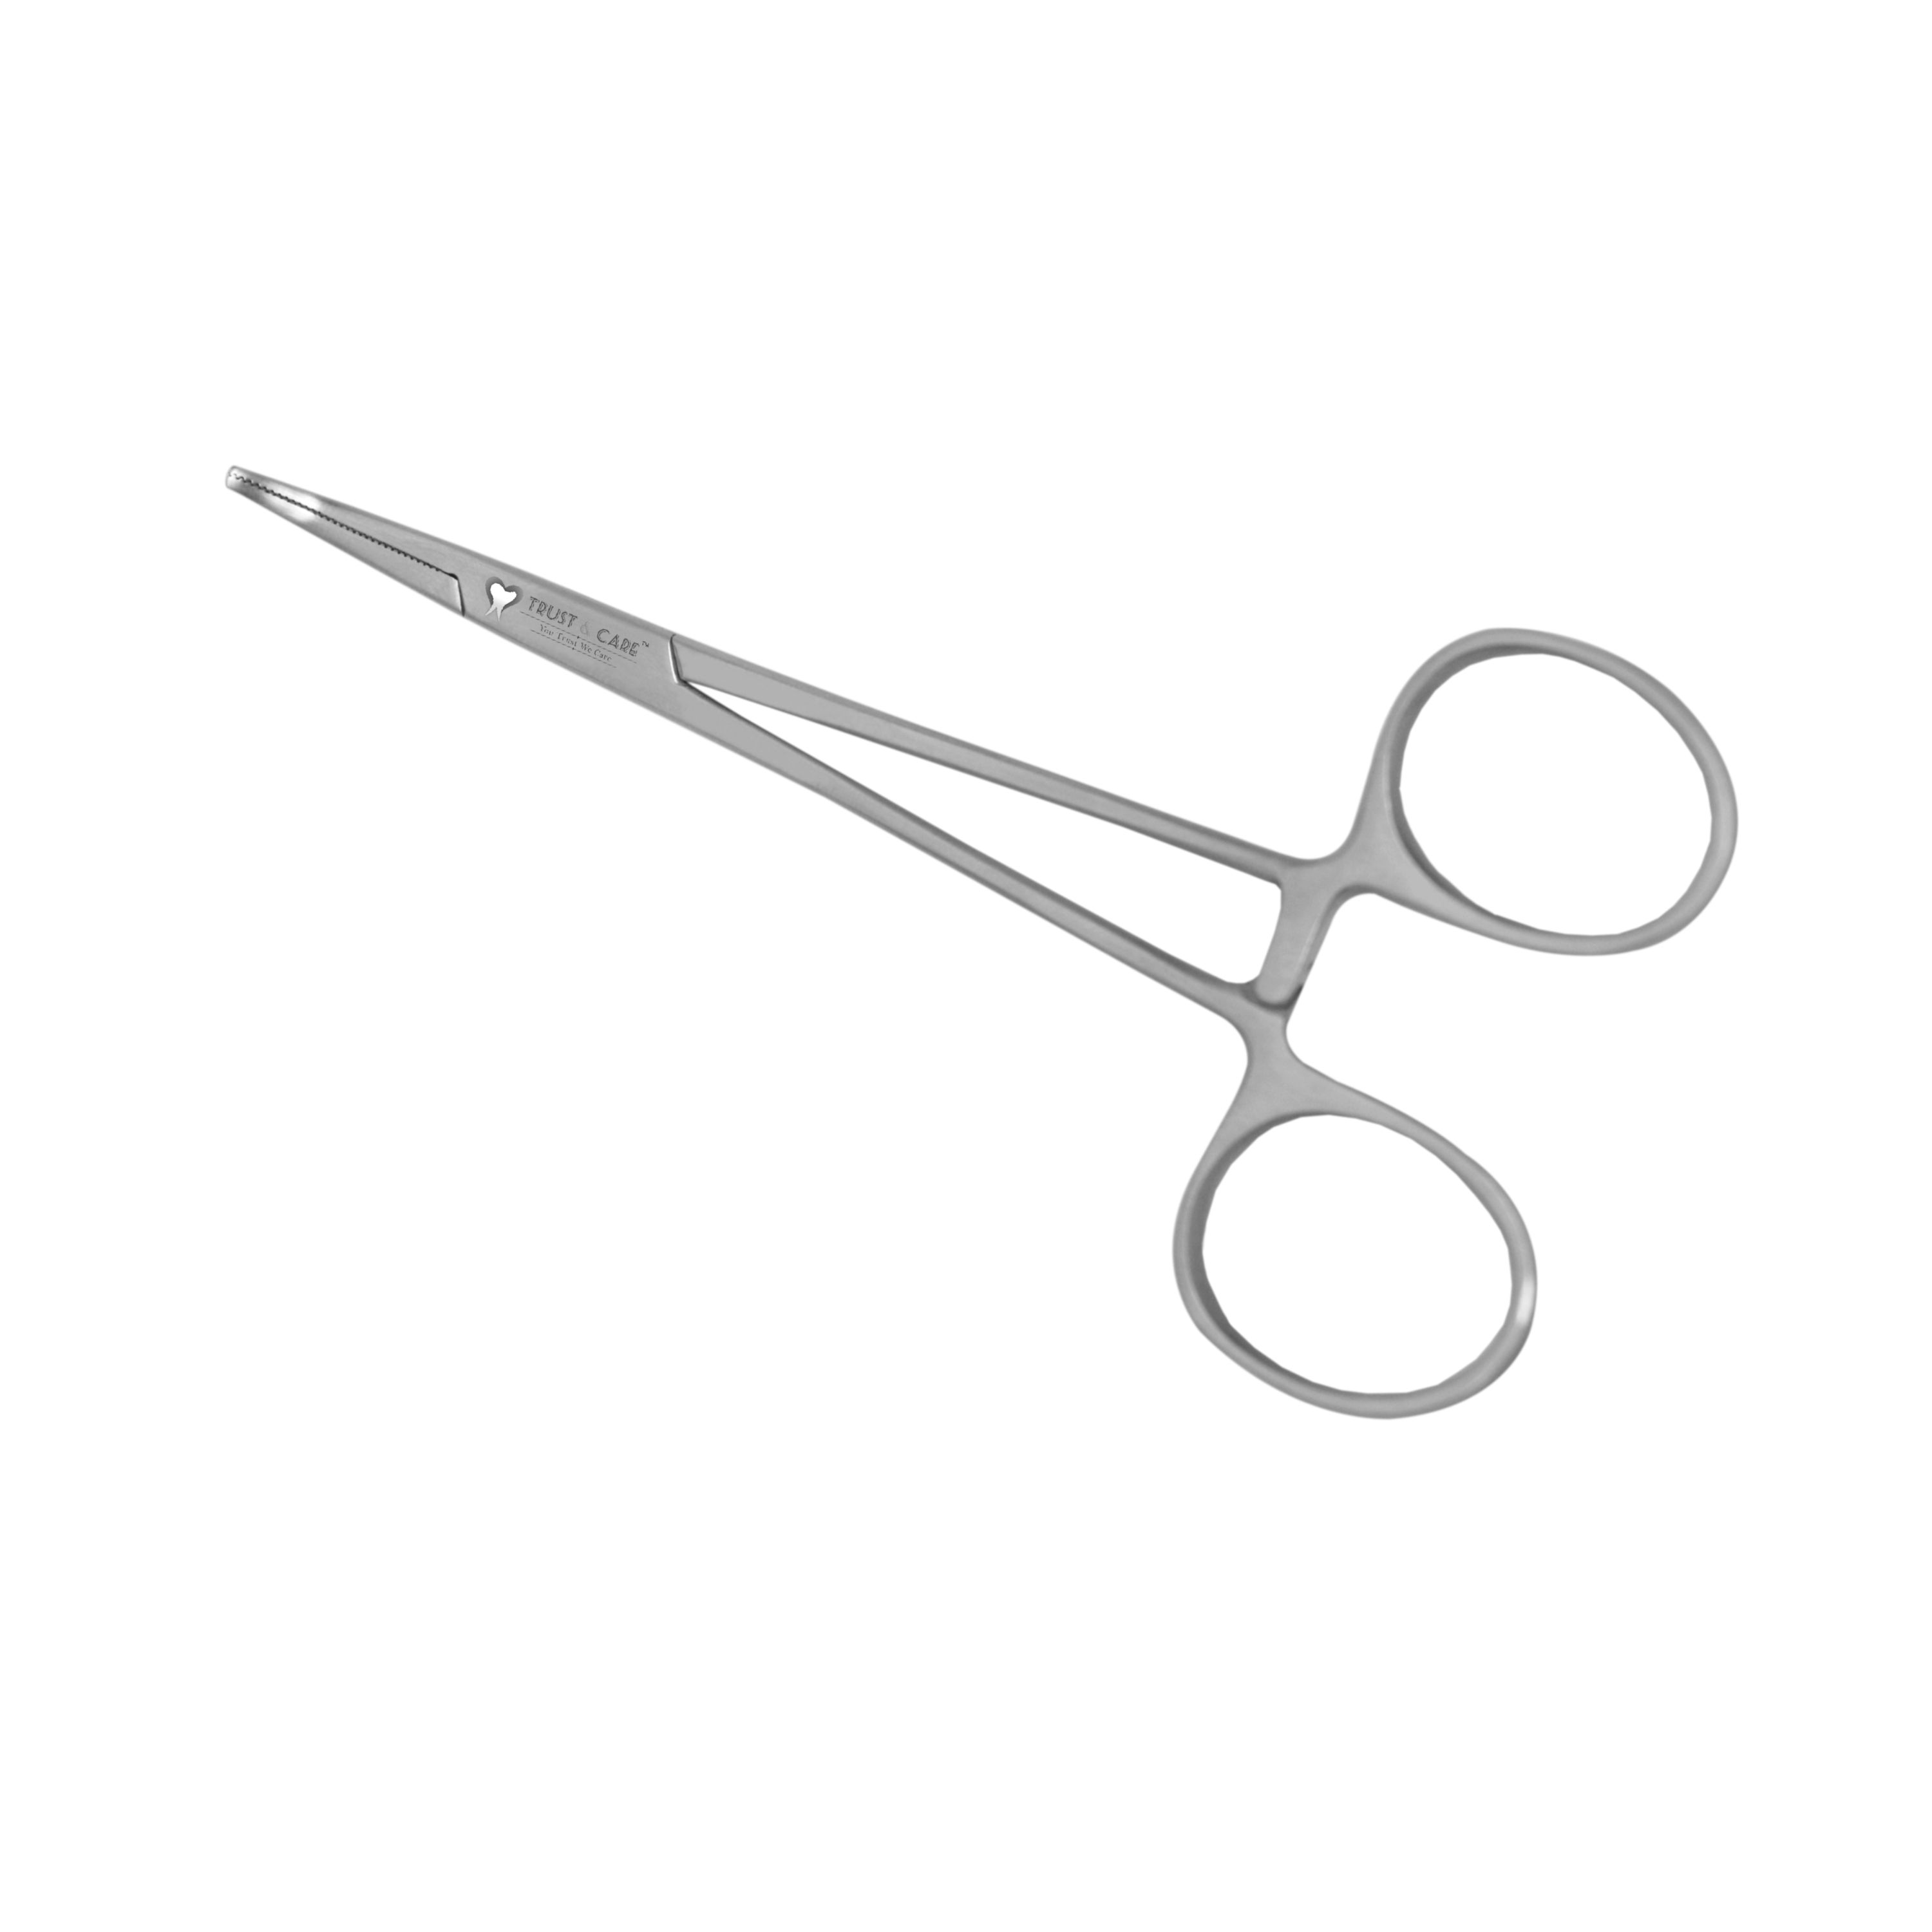 Trust & Care Mosquito Artery/Hemostats Forceps 12 Cm Curved